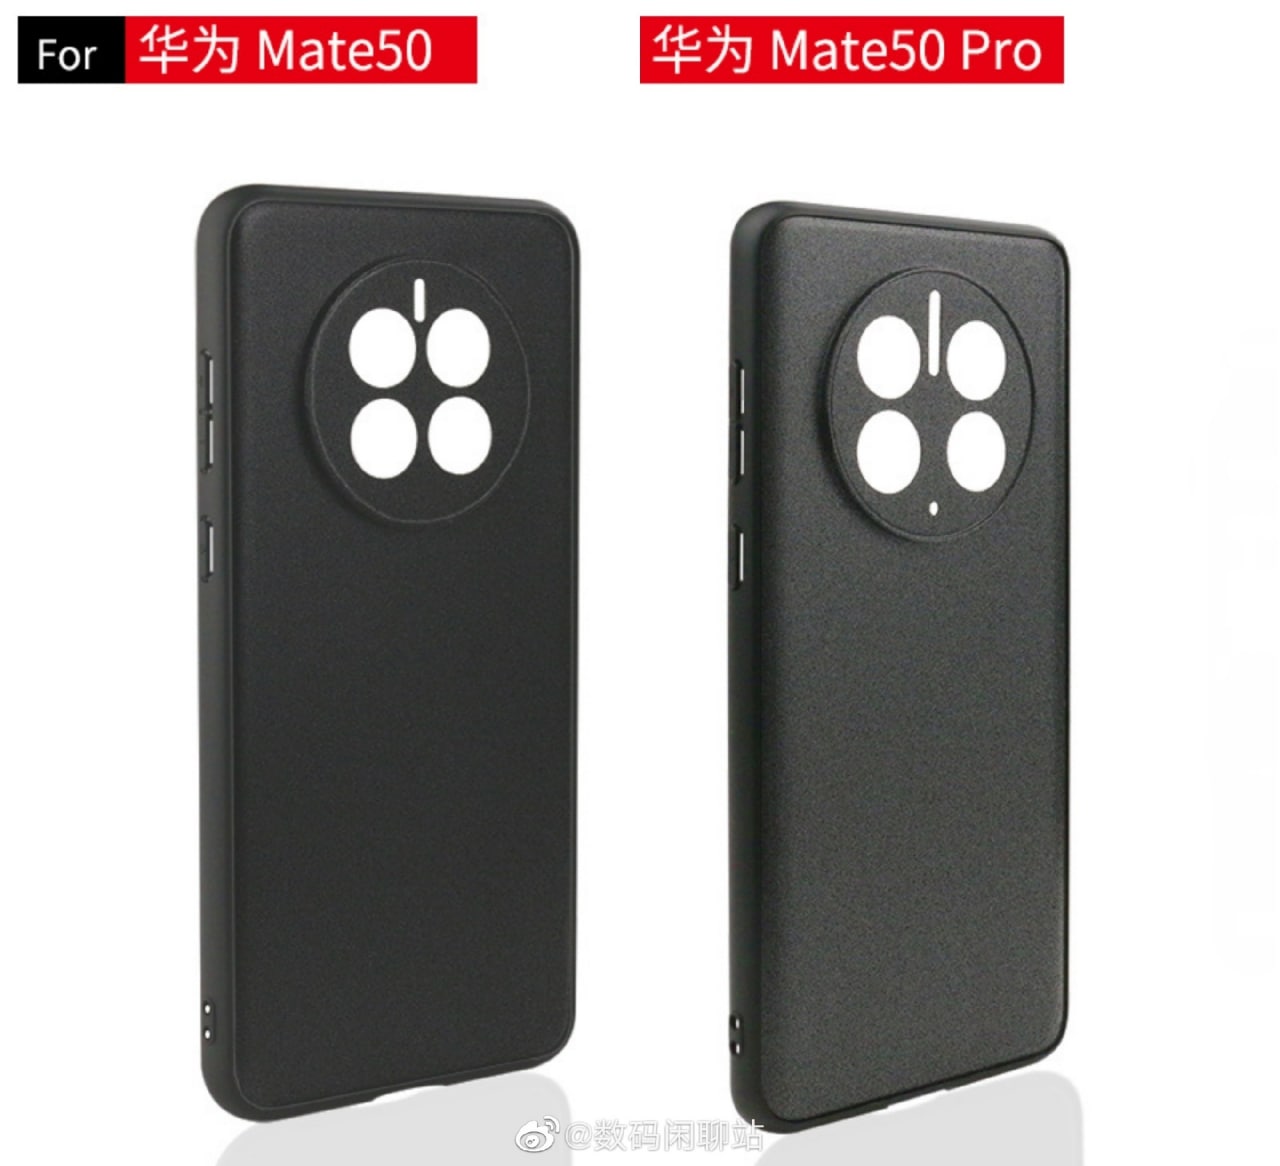 Huawei Mate 50 Pro 5G case leaked out in live images - Huawei Central